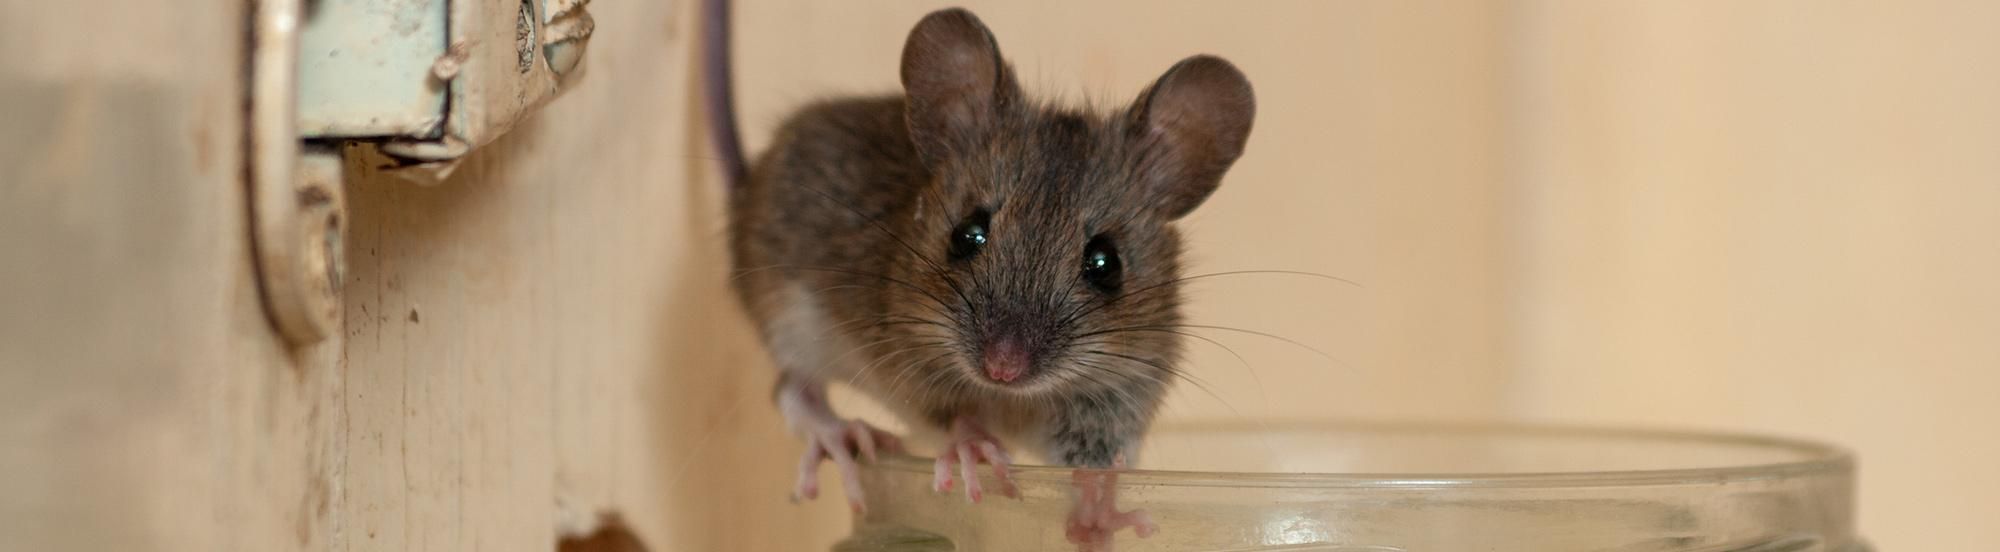 house mouse searching for food and water in midwest home